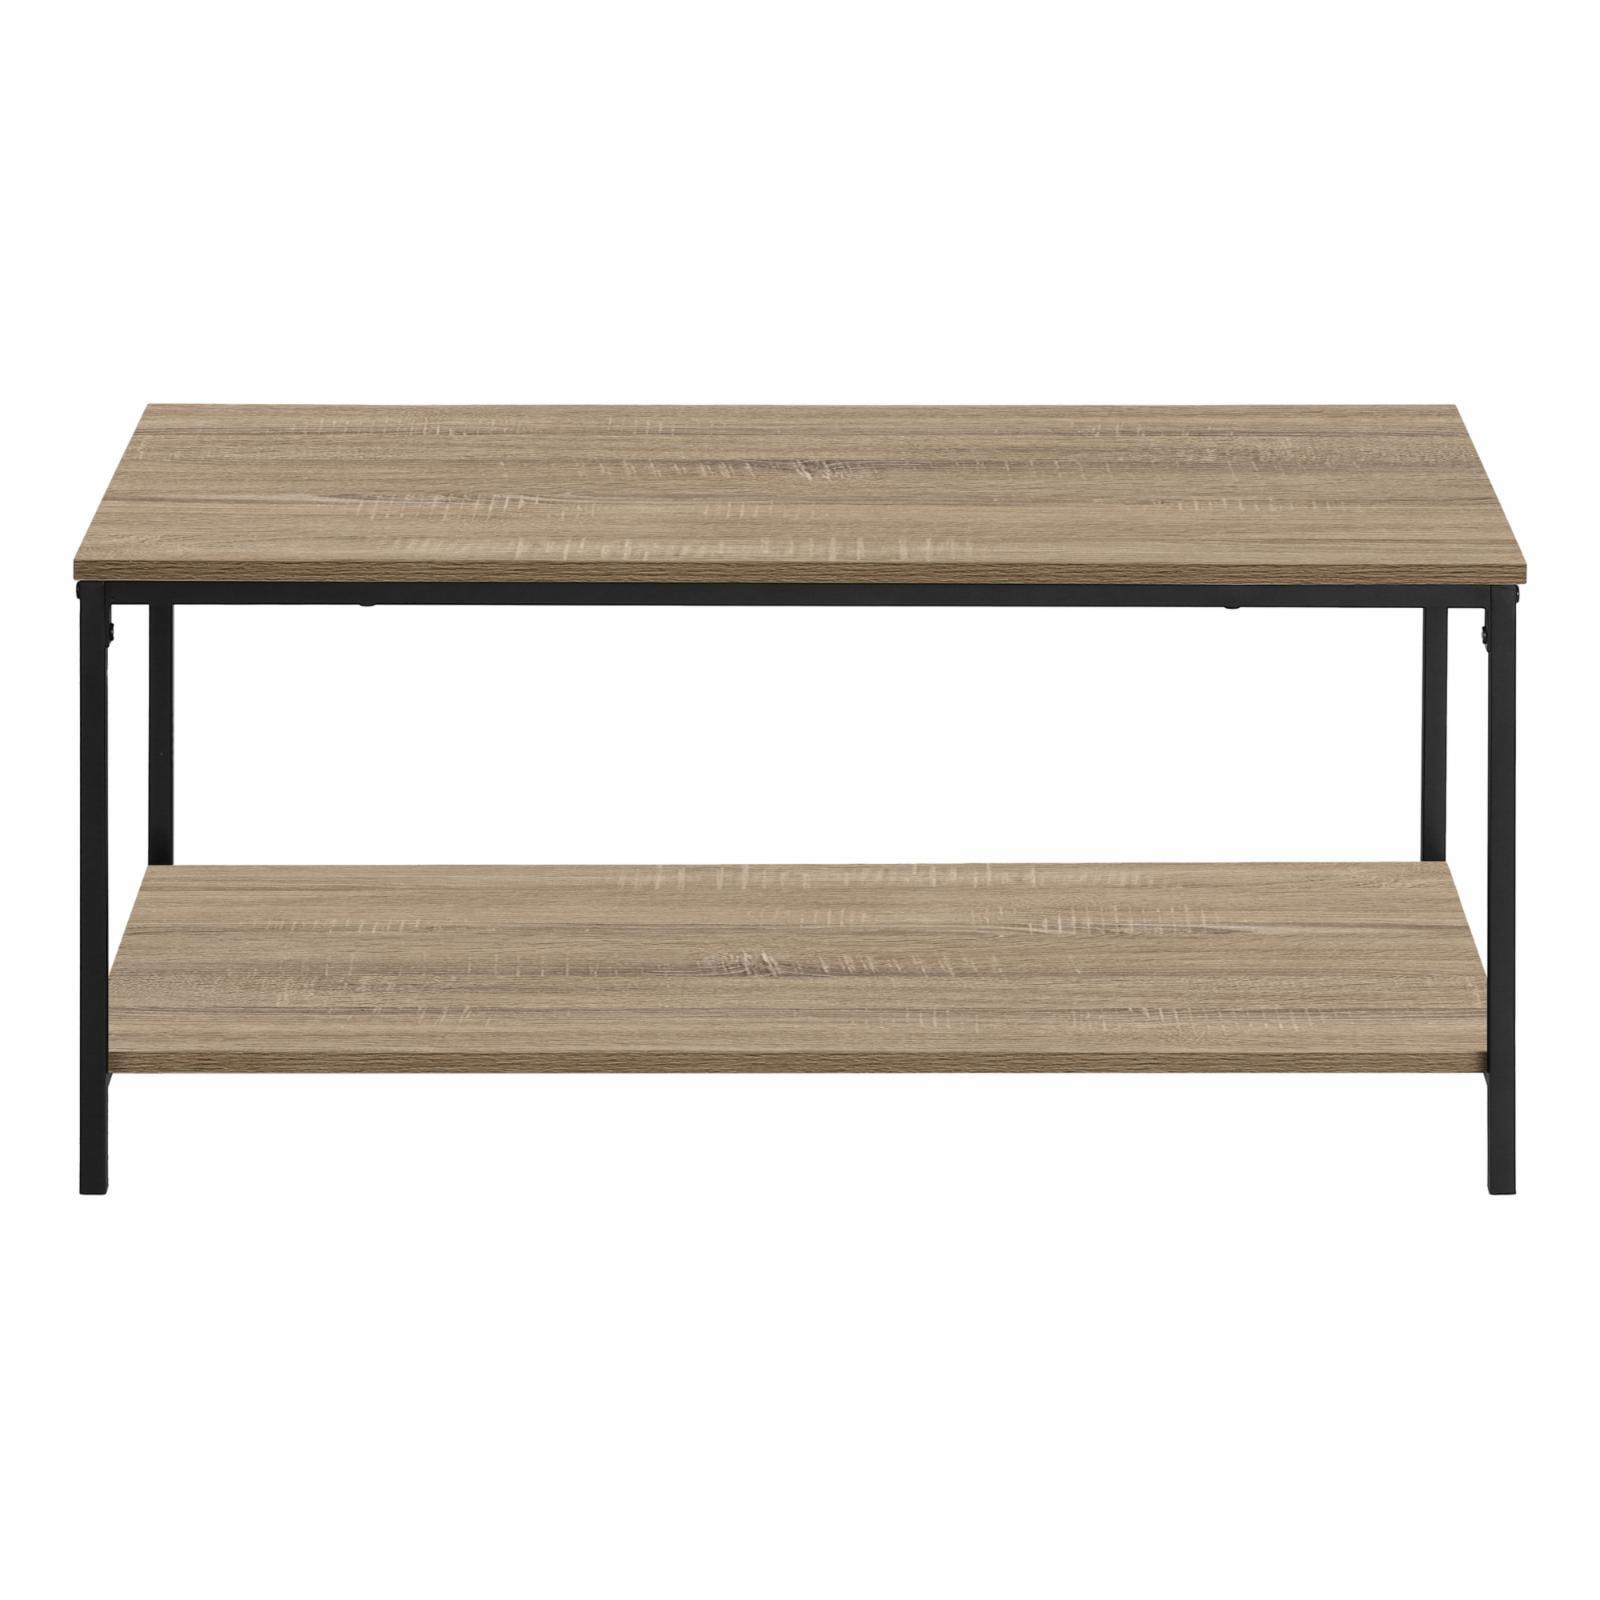 Contemporary 40" Rectangular Coffee Table in Dark Taupe & Black